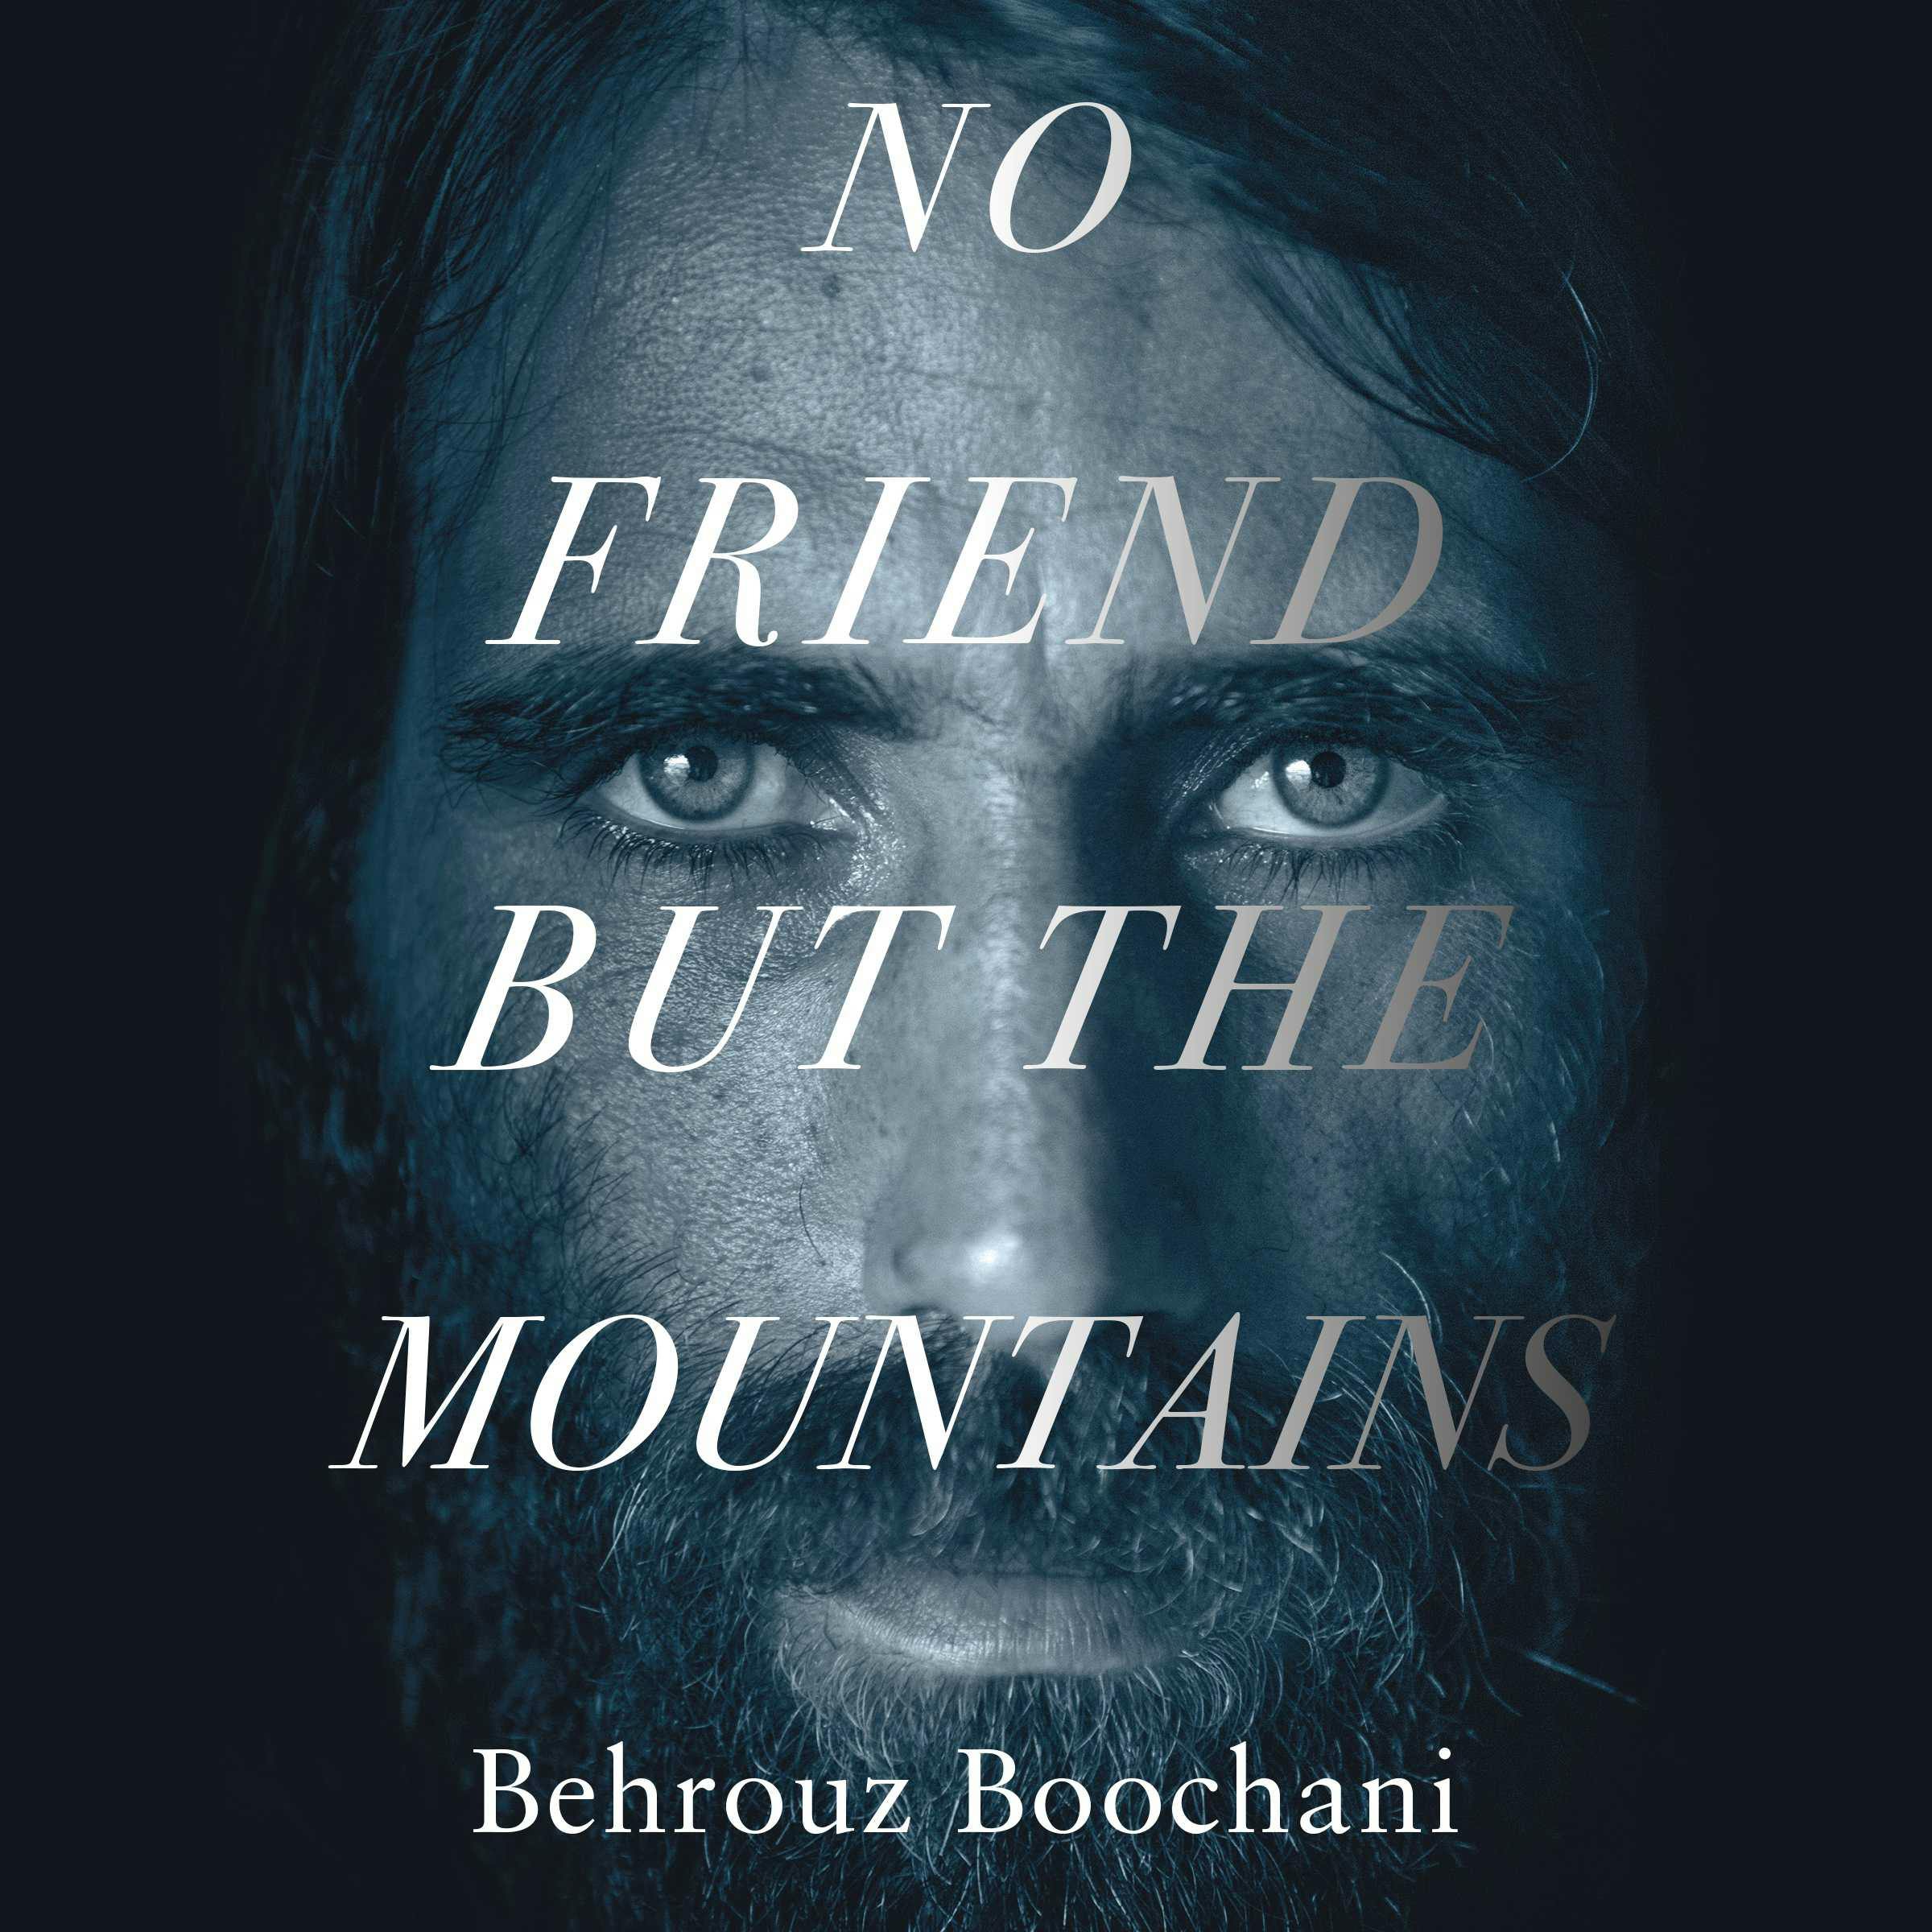 No Friend but the Mountains: The True Story of an Illegally Imprisoned Refugee - Behrouz Boochani